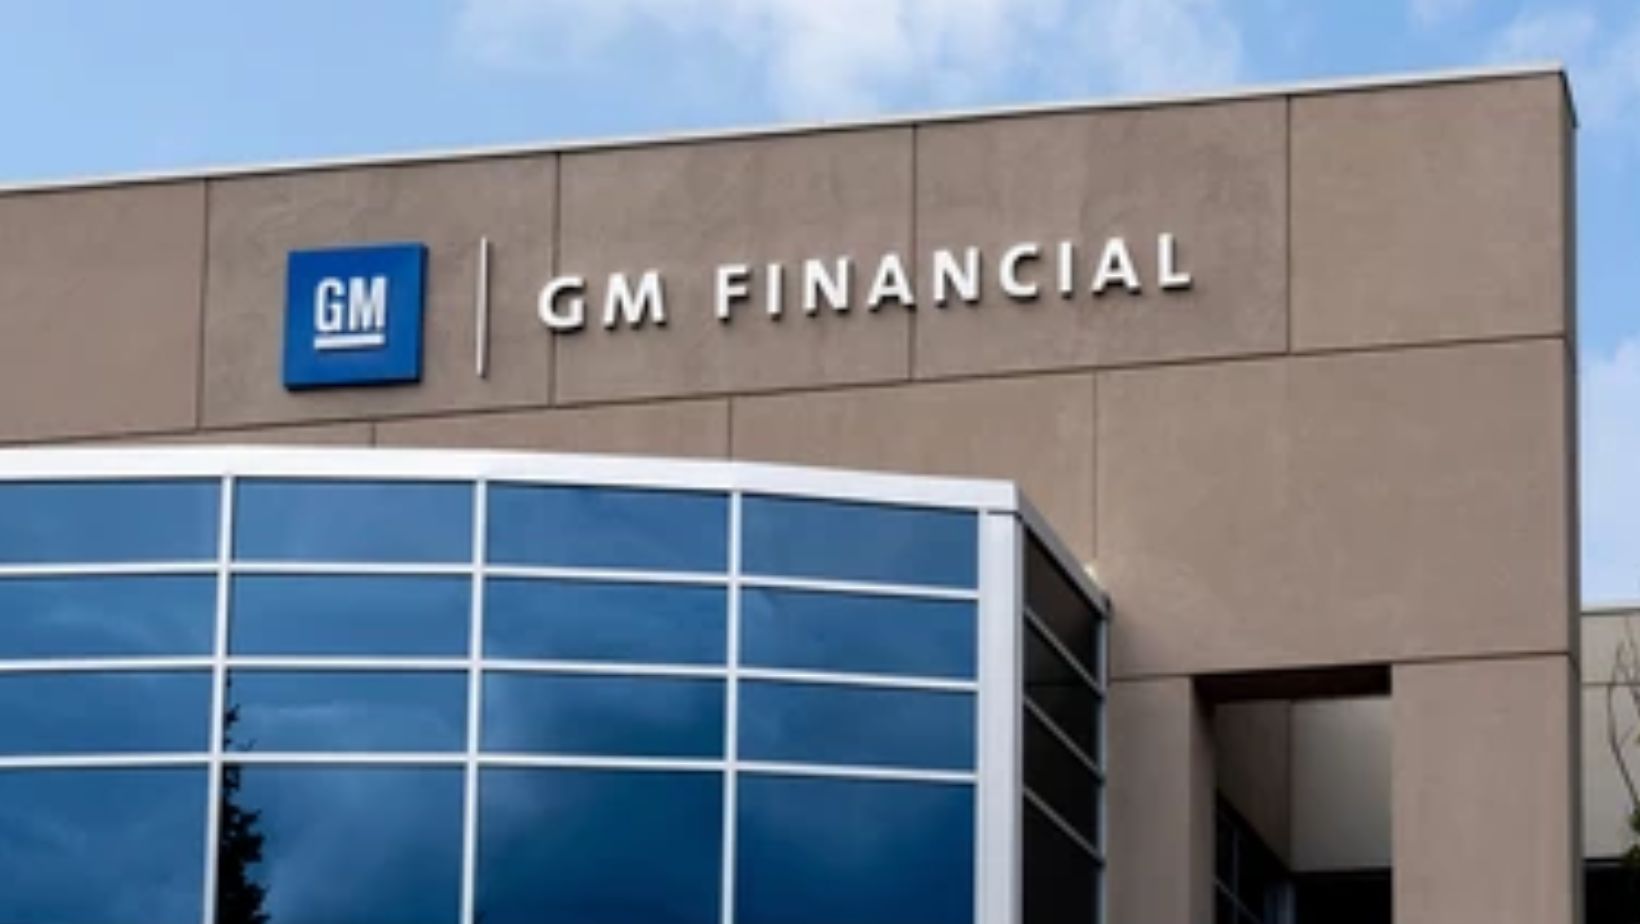 Mobile Product Manager Job at GM Financial Apply Right Now